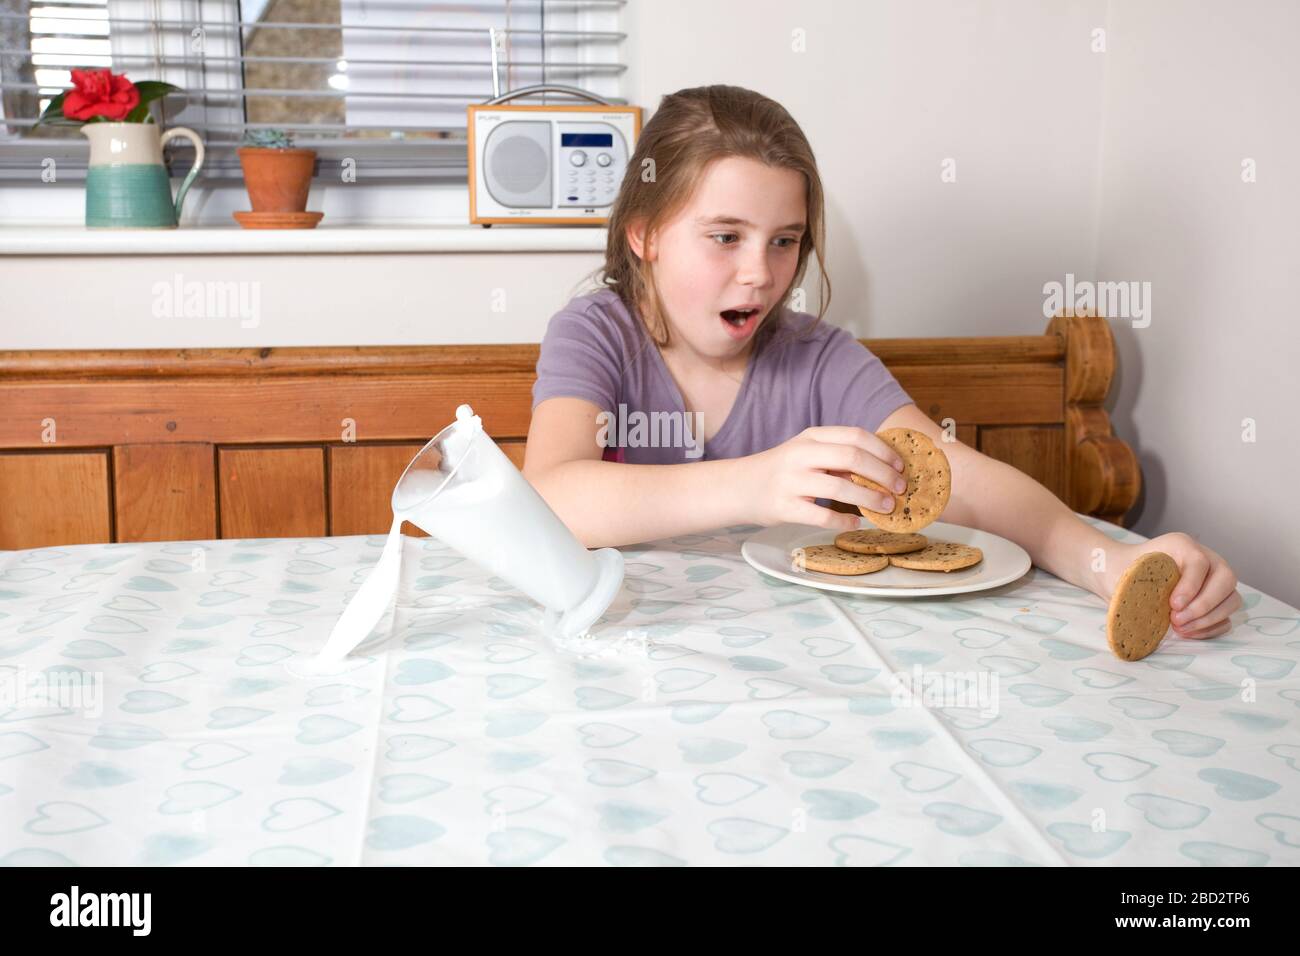 Young girl spilling a glass of milk over the kitchen table Stock Photo